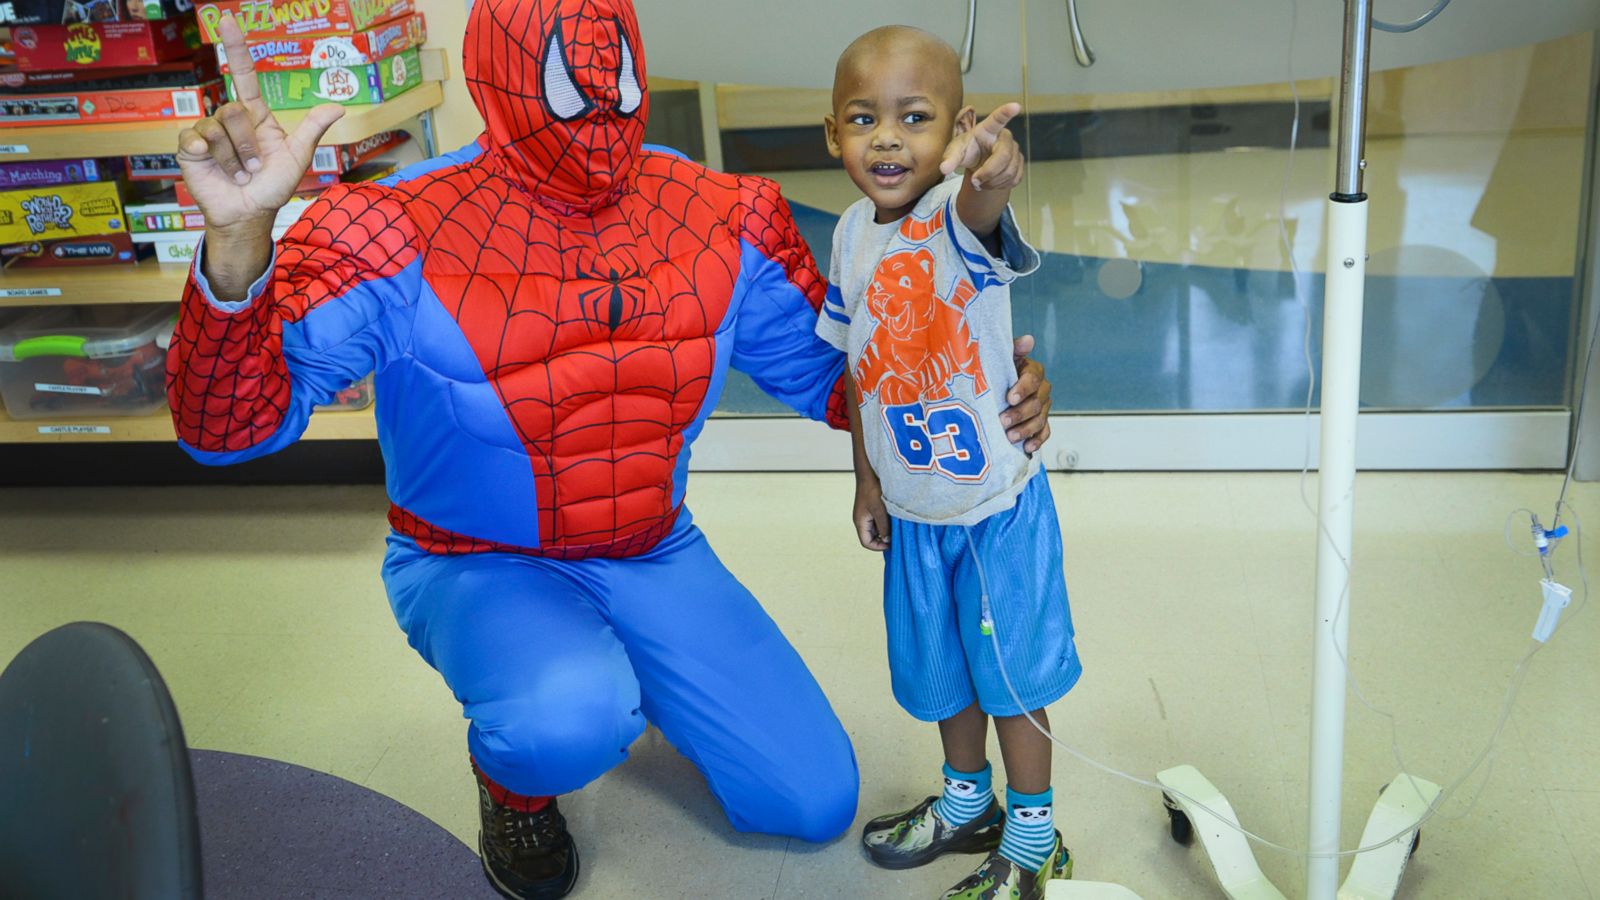 Spiderman Swings Into Action at Dallas Children's Hospital - ABC News